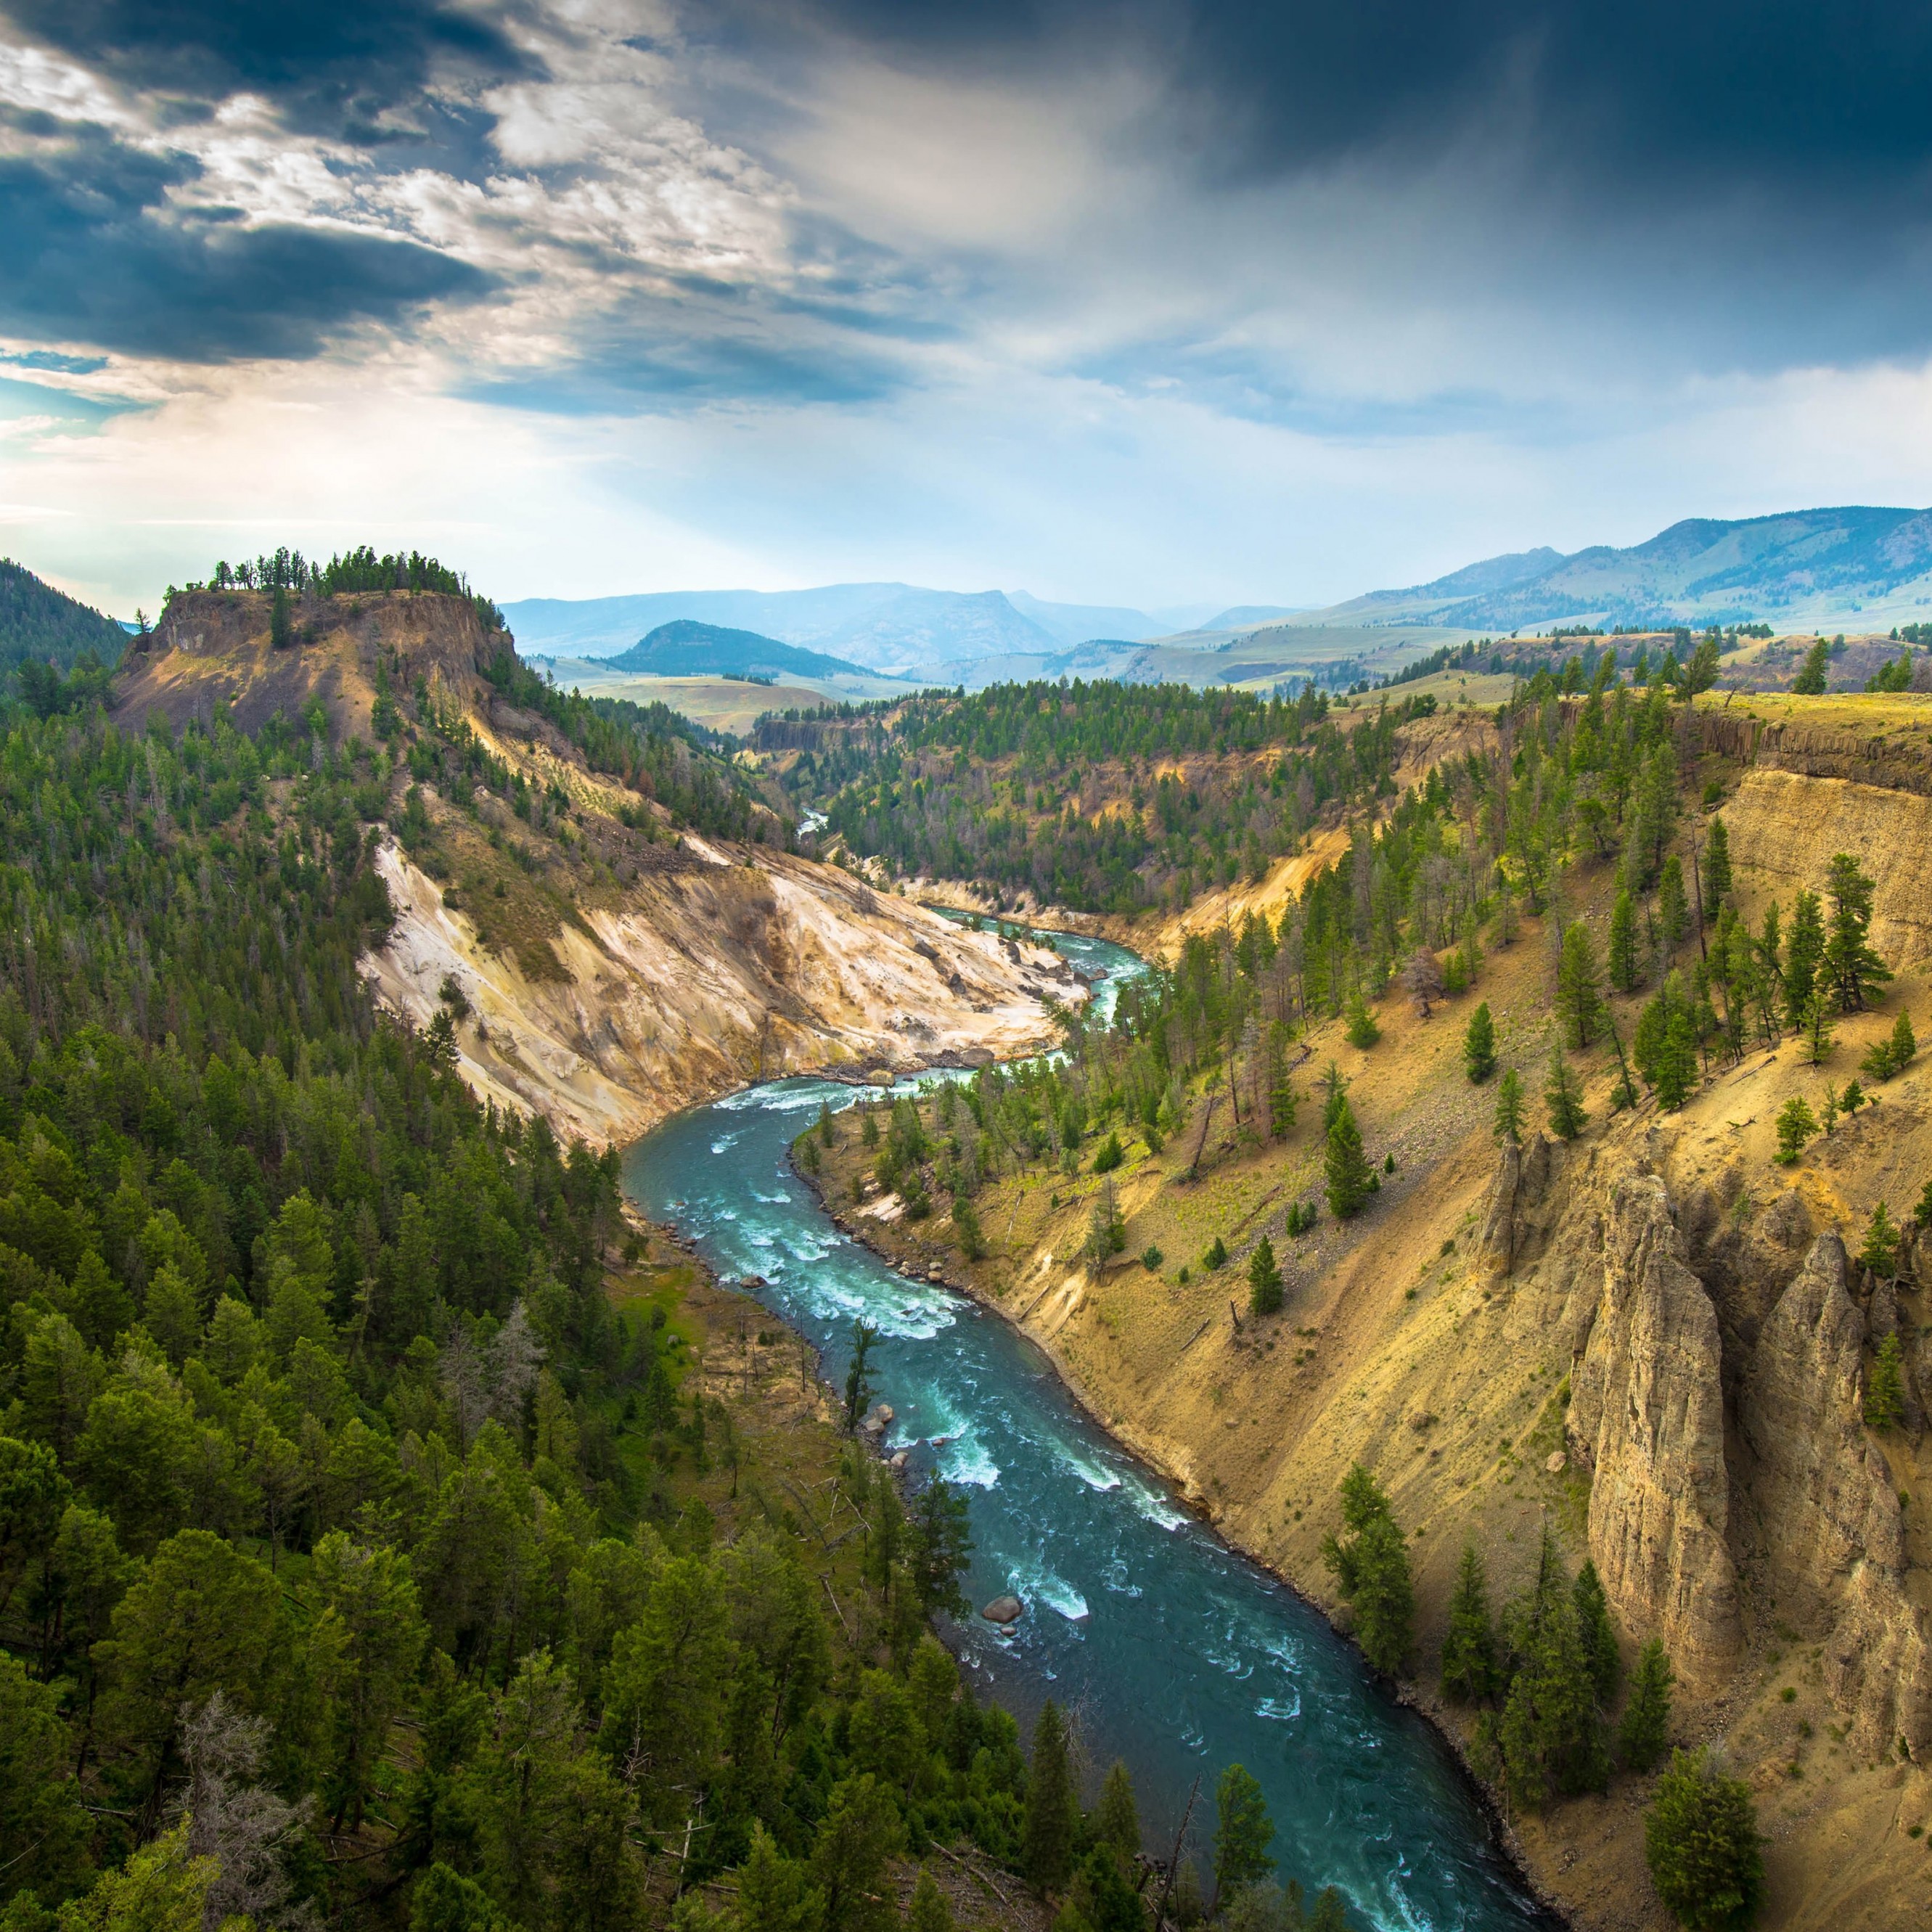 The River, Grand Canyon of Yellowstone National Park, USA Wallpaper for Apple iPhone 6 Plus